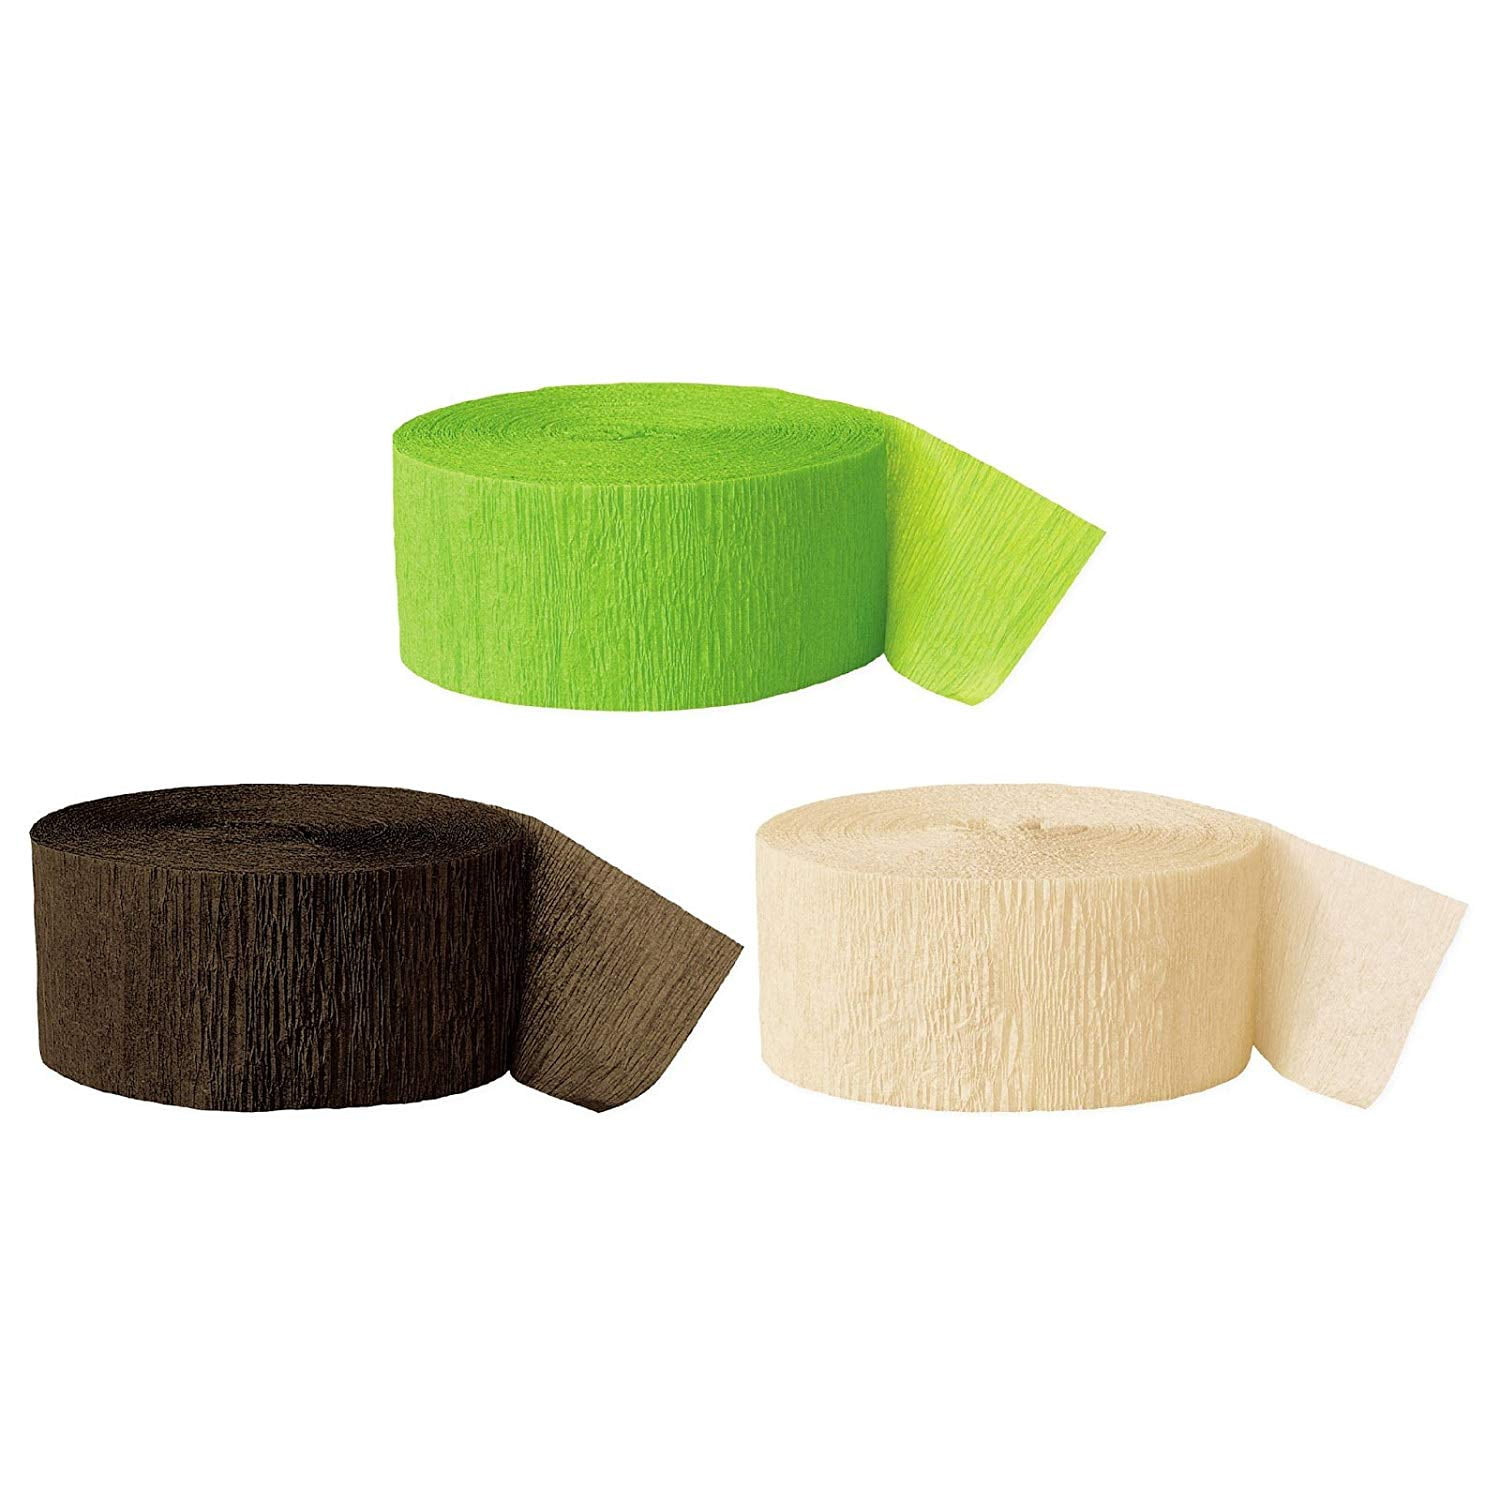 Buy Kiwi Green Streamers Online for Decorations